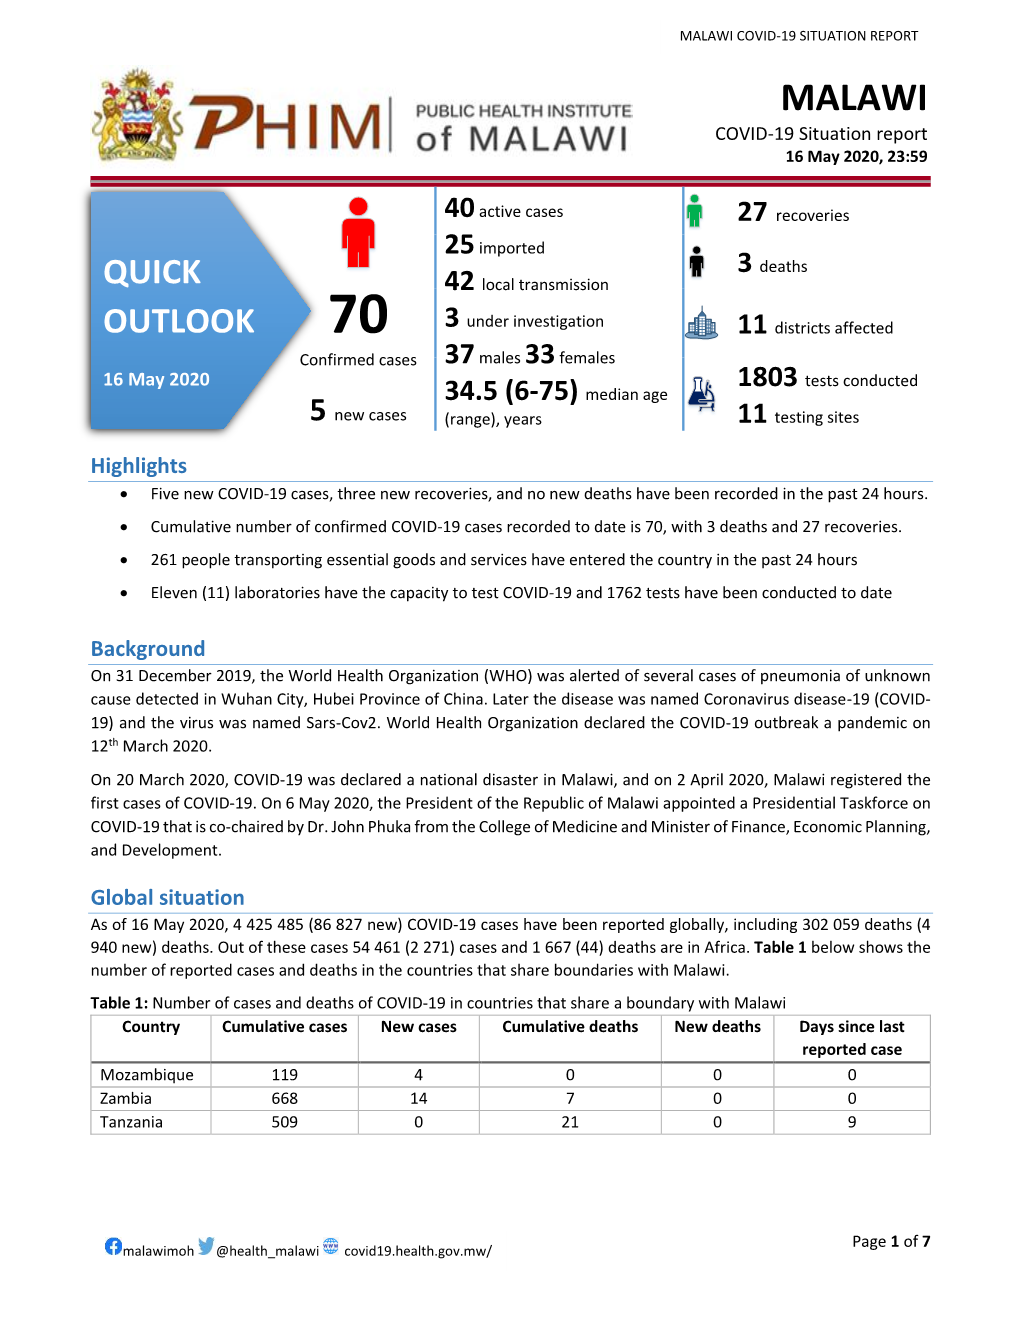 MALAWI COVID-19 SITUATION REPORT MALAWI COVID-19 Situation Report 16 May 2020, 23:59